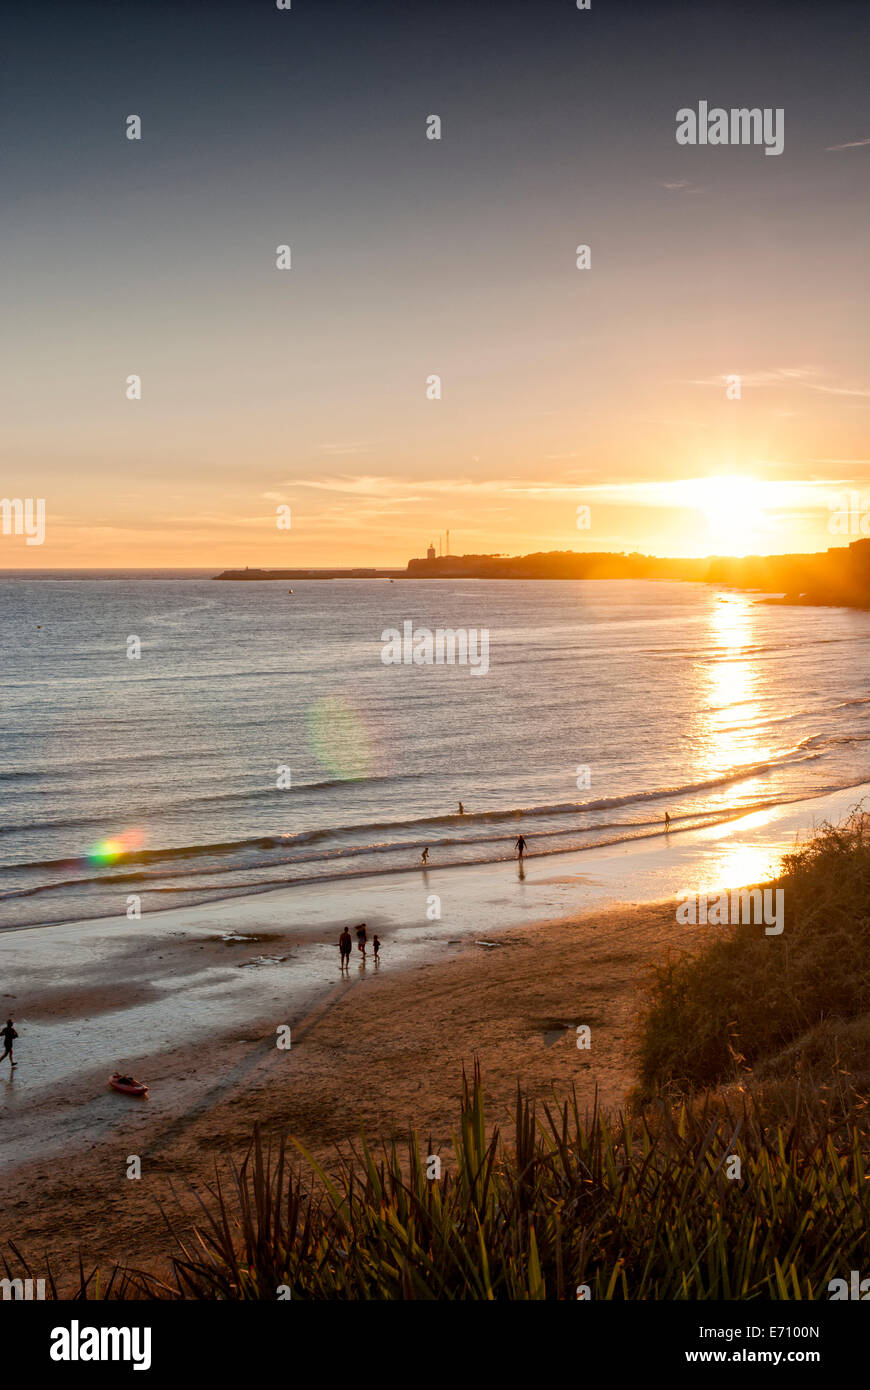 Panoramic View Of Conil De La Frontera In Southern Spain At Sunset Stock  Photo - Download Image Now - iStock